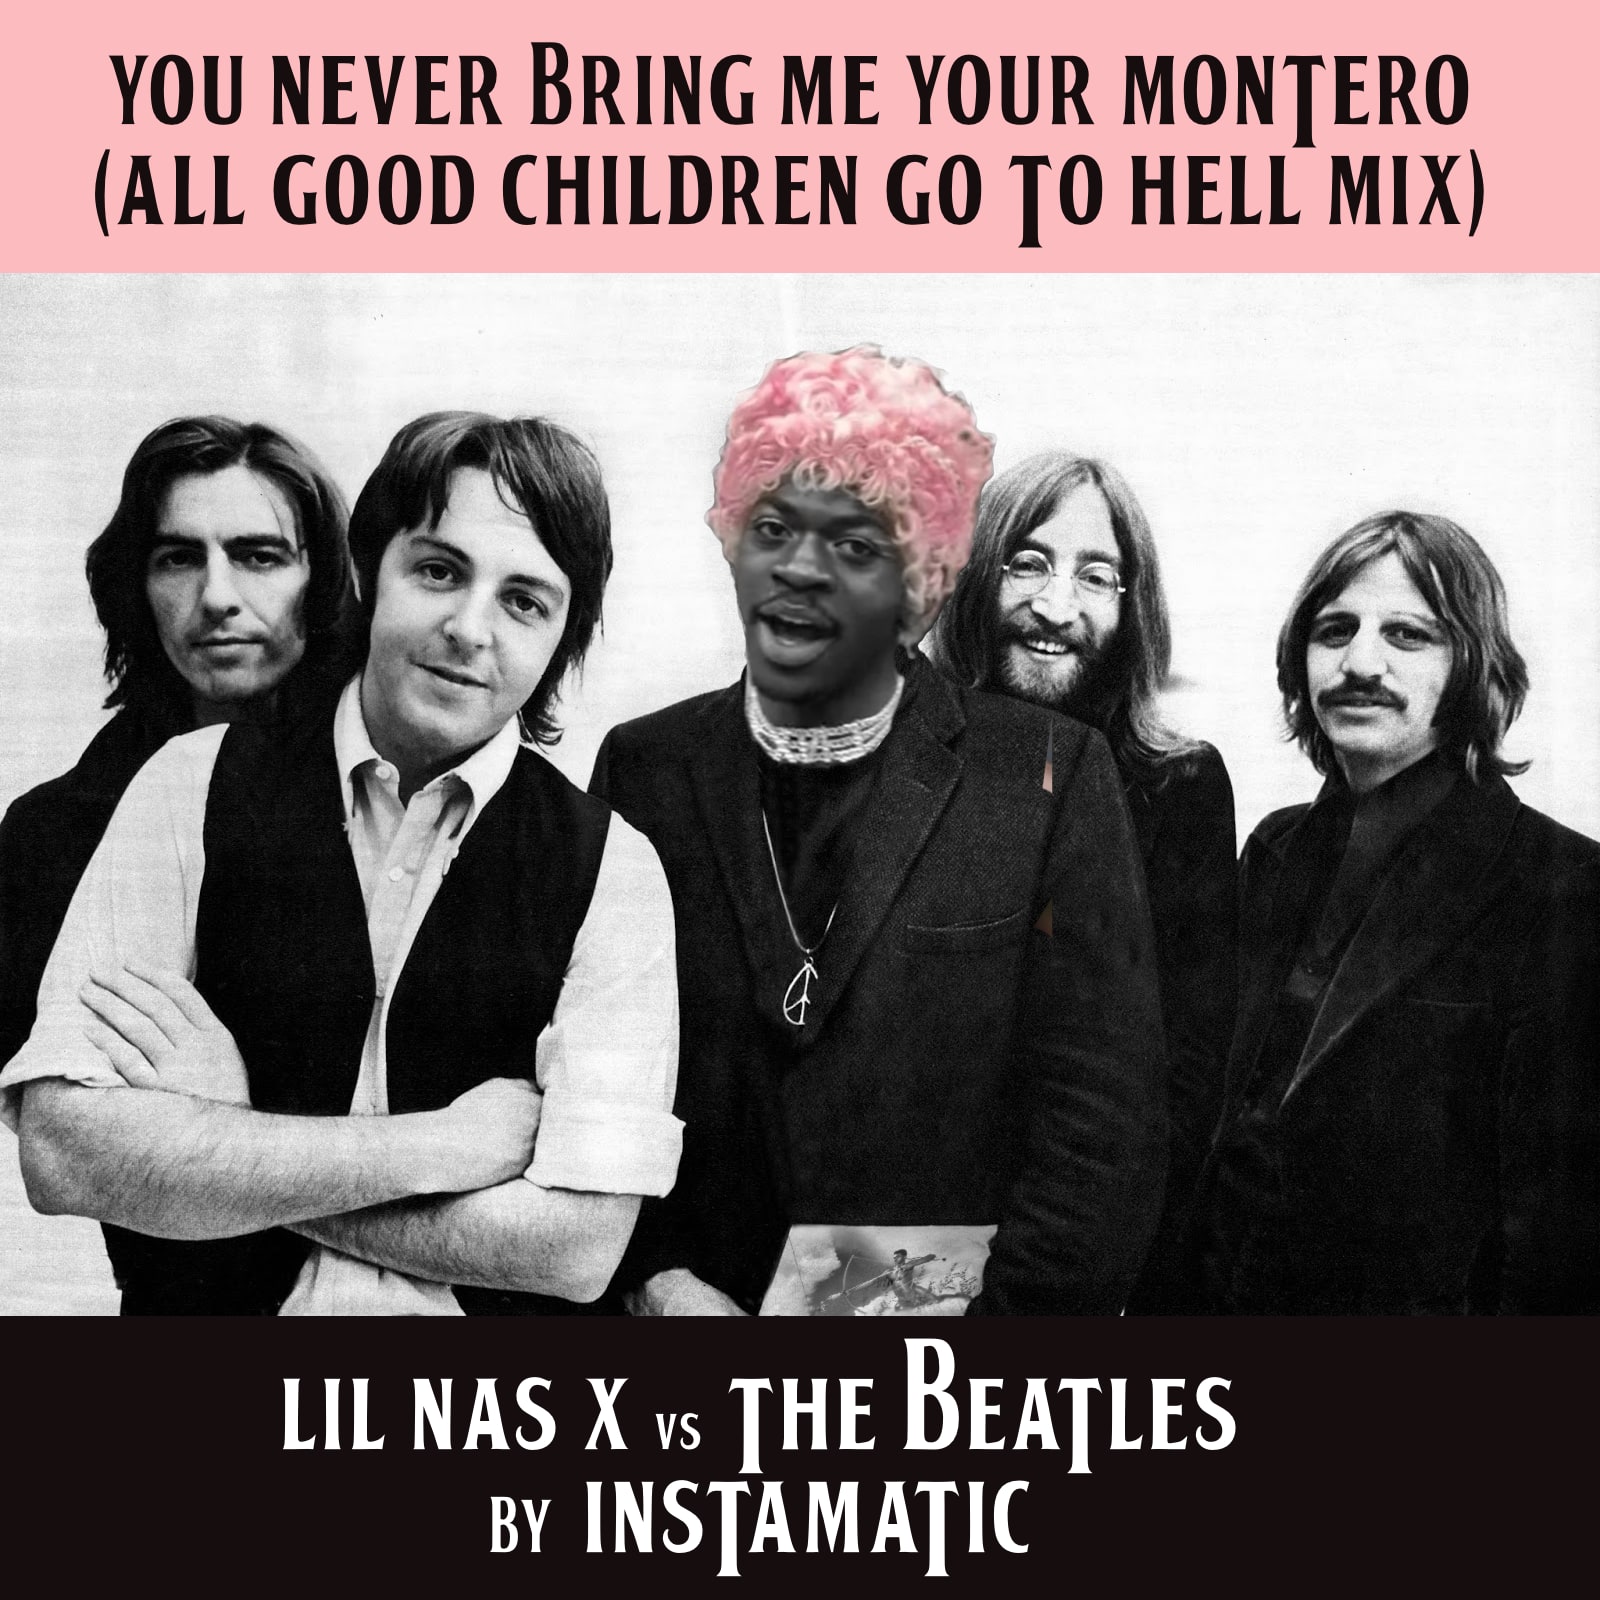 Lil Nas X Montero Call Me By My Name vs Beatles You Never Give Me Your Money mashup bootleg bastard pop cover